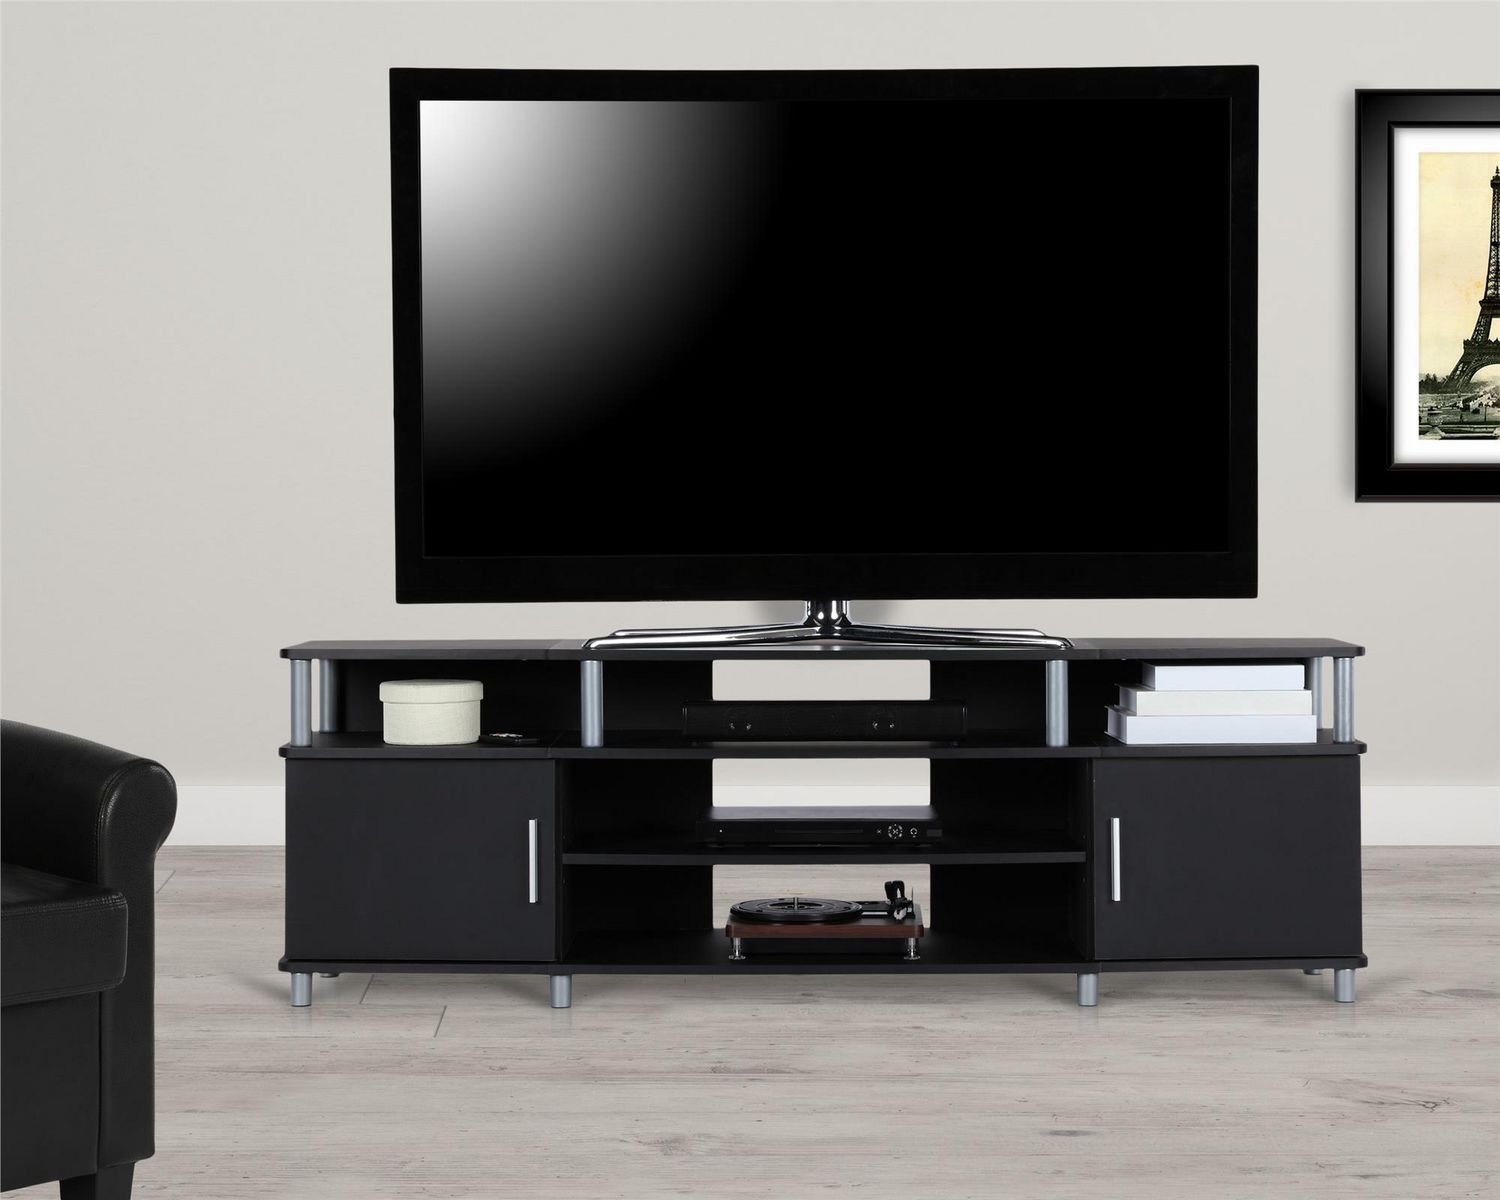 Carson Tv Stand For Tvs Up To 70", Black | Walmart Canada With Carson Tv Stands In Black And Cherry (View 2 of 15)